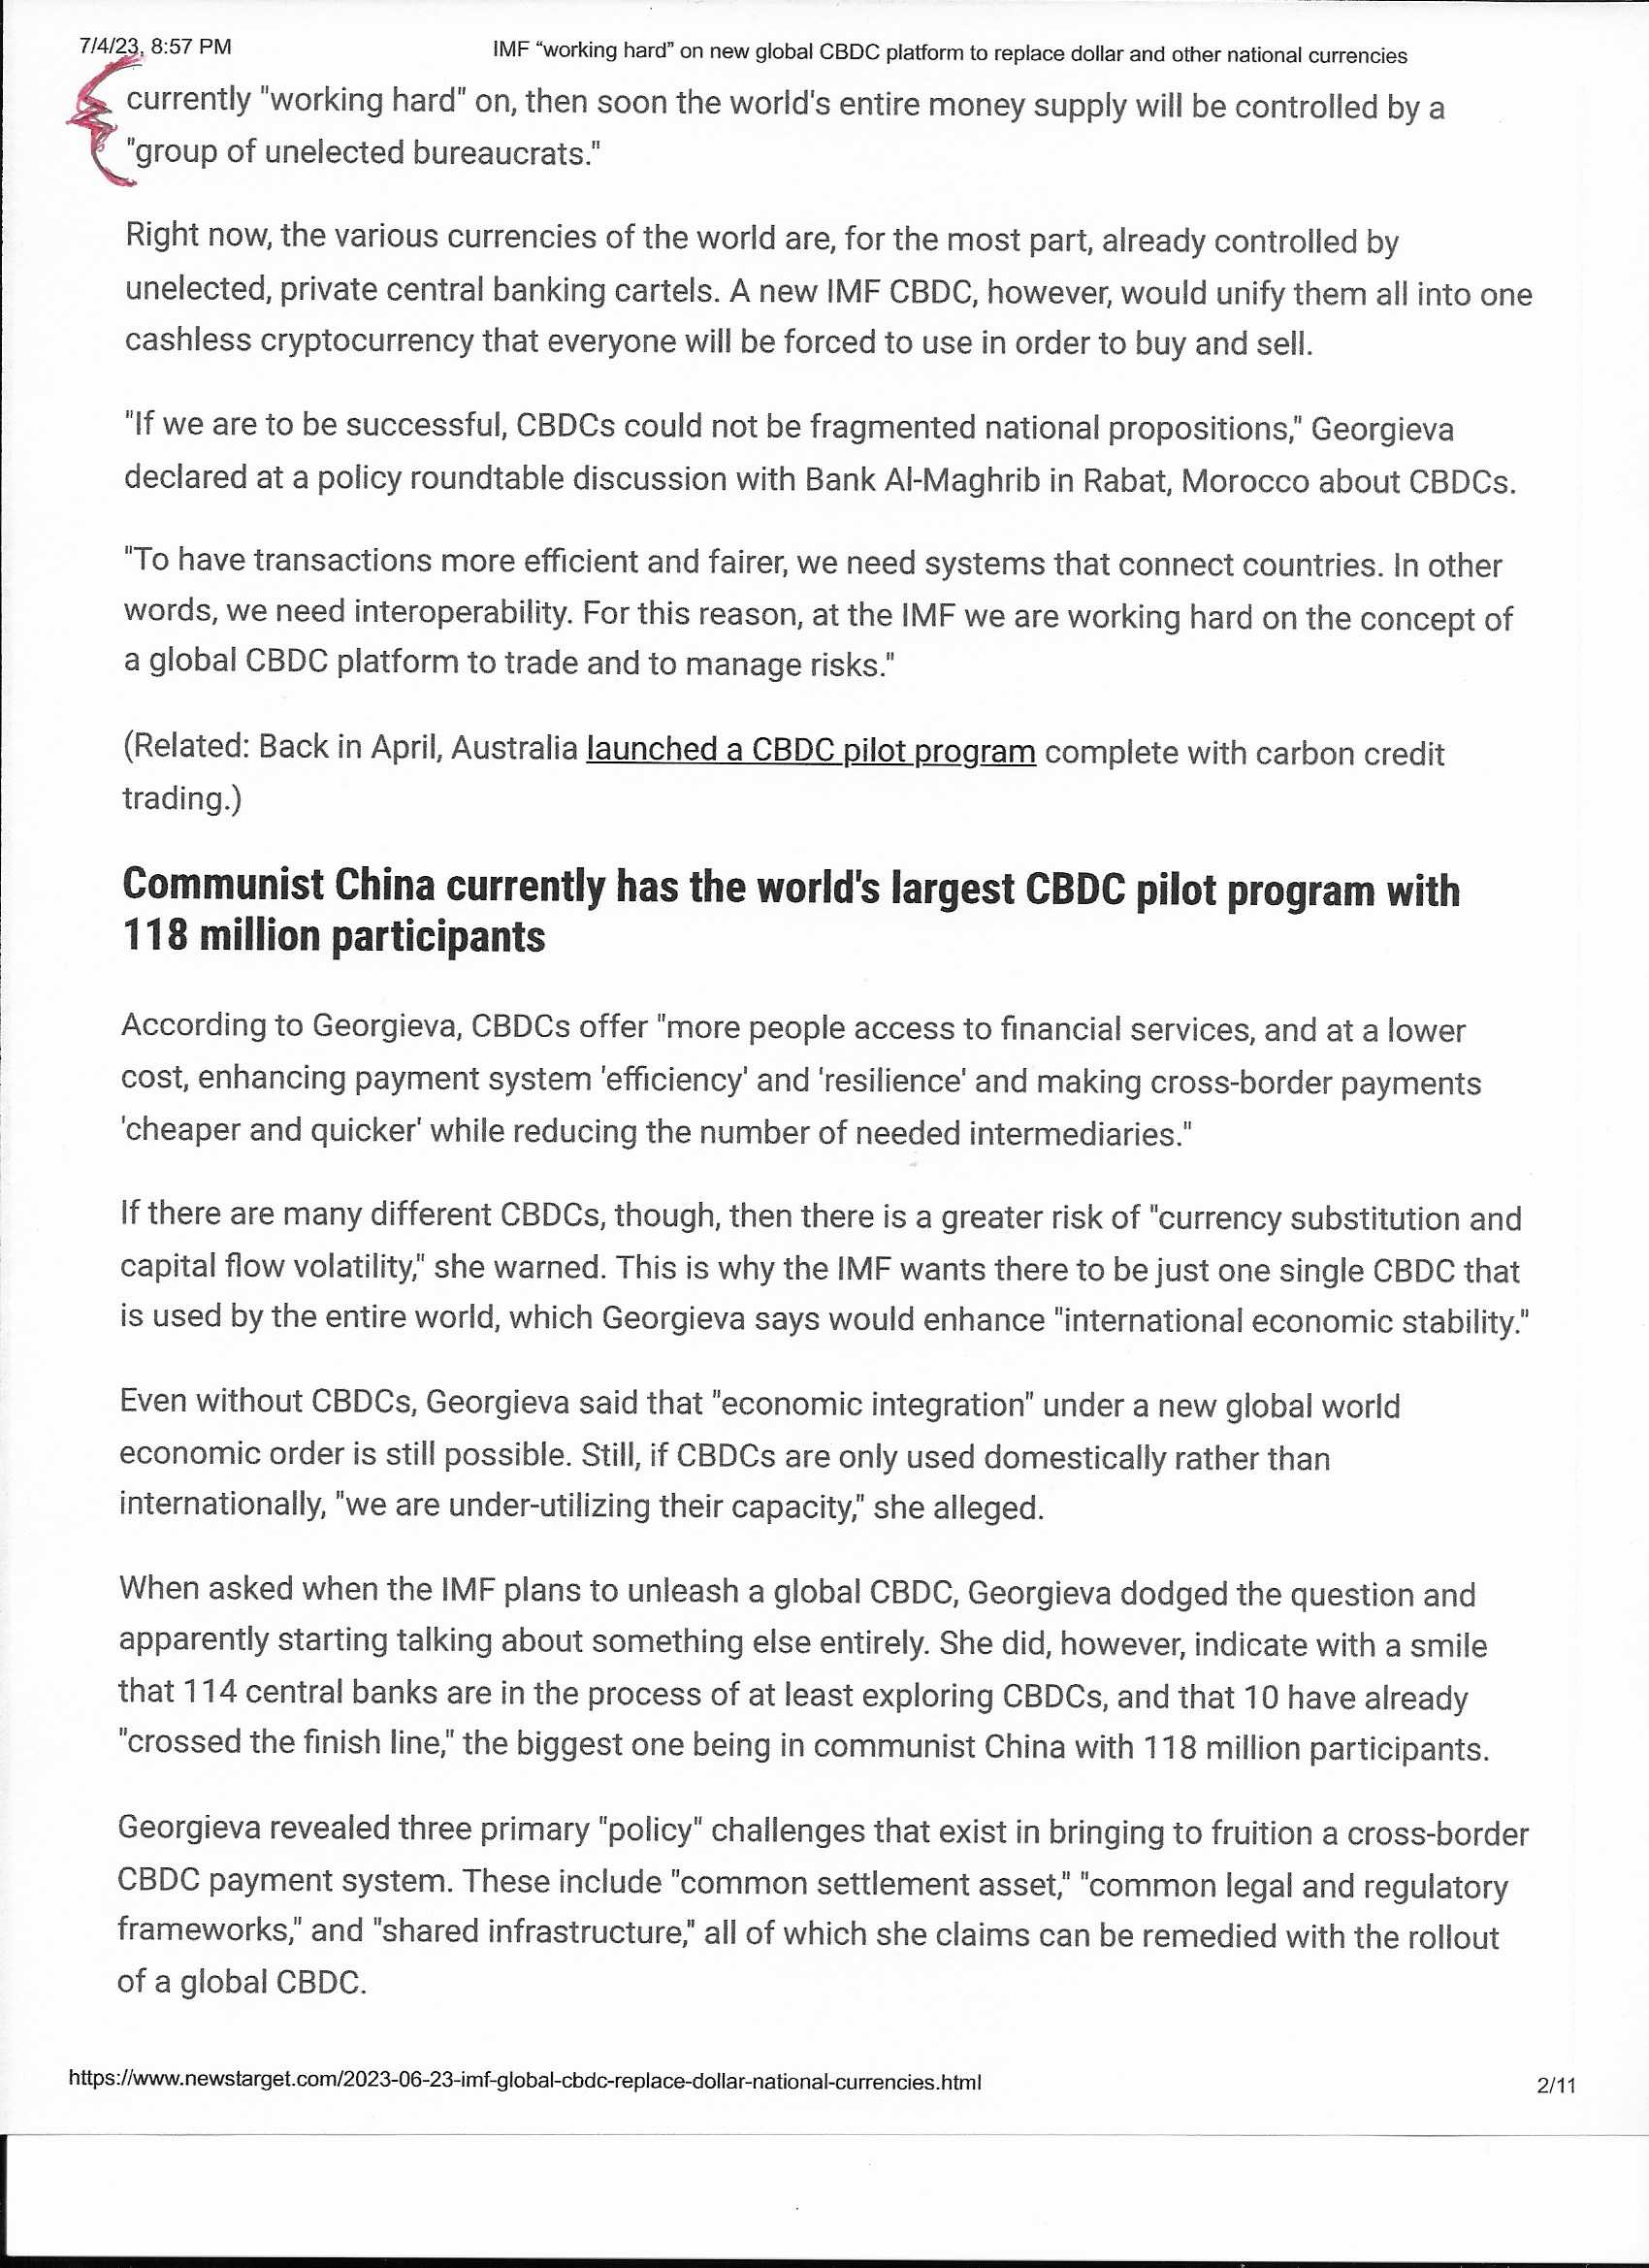 IMF “working hard” on new global CBDC platform to replace dollar and other national currencies  print out highlights page 2 